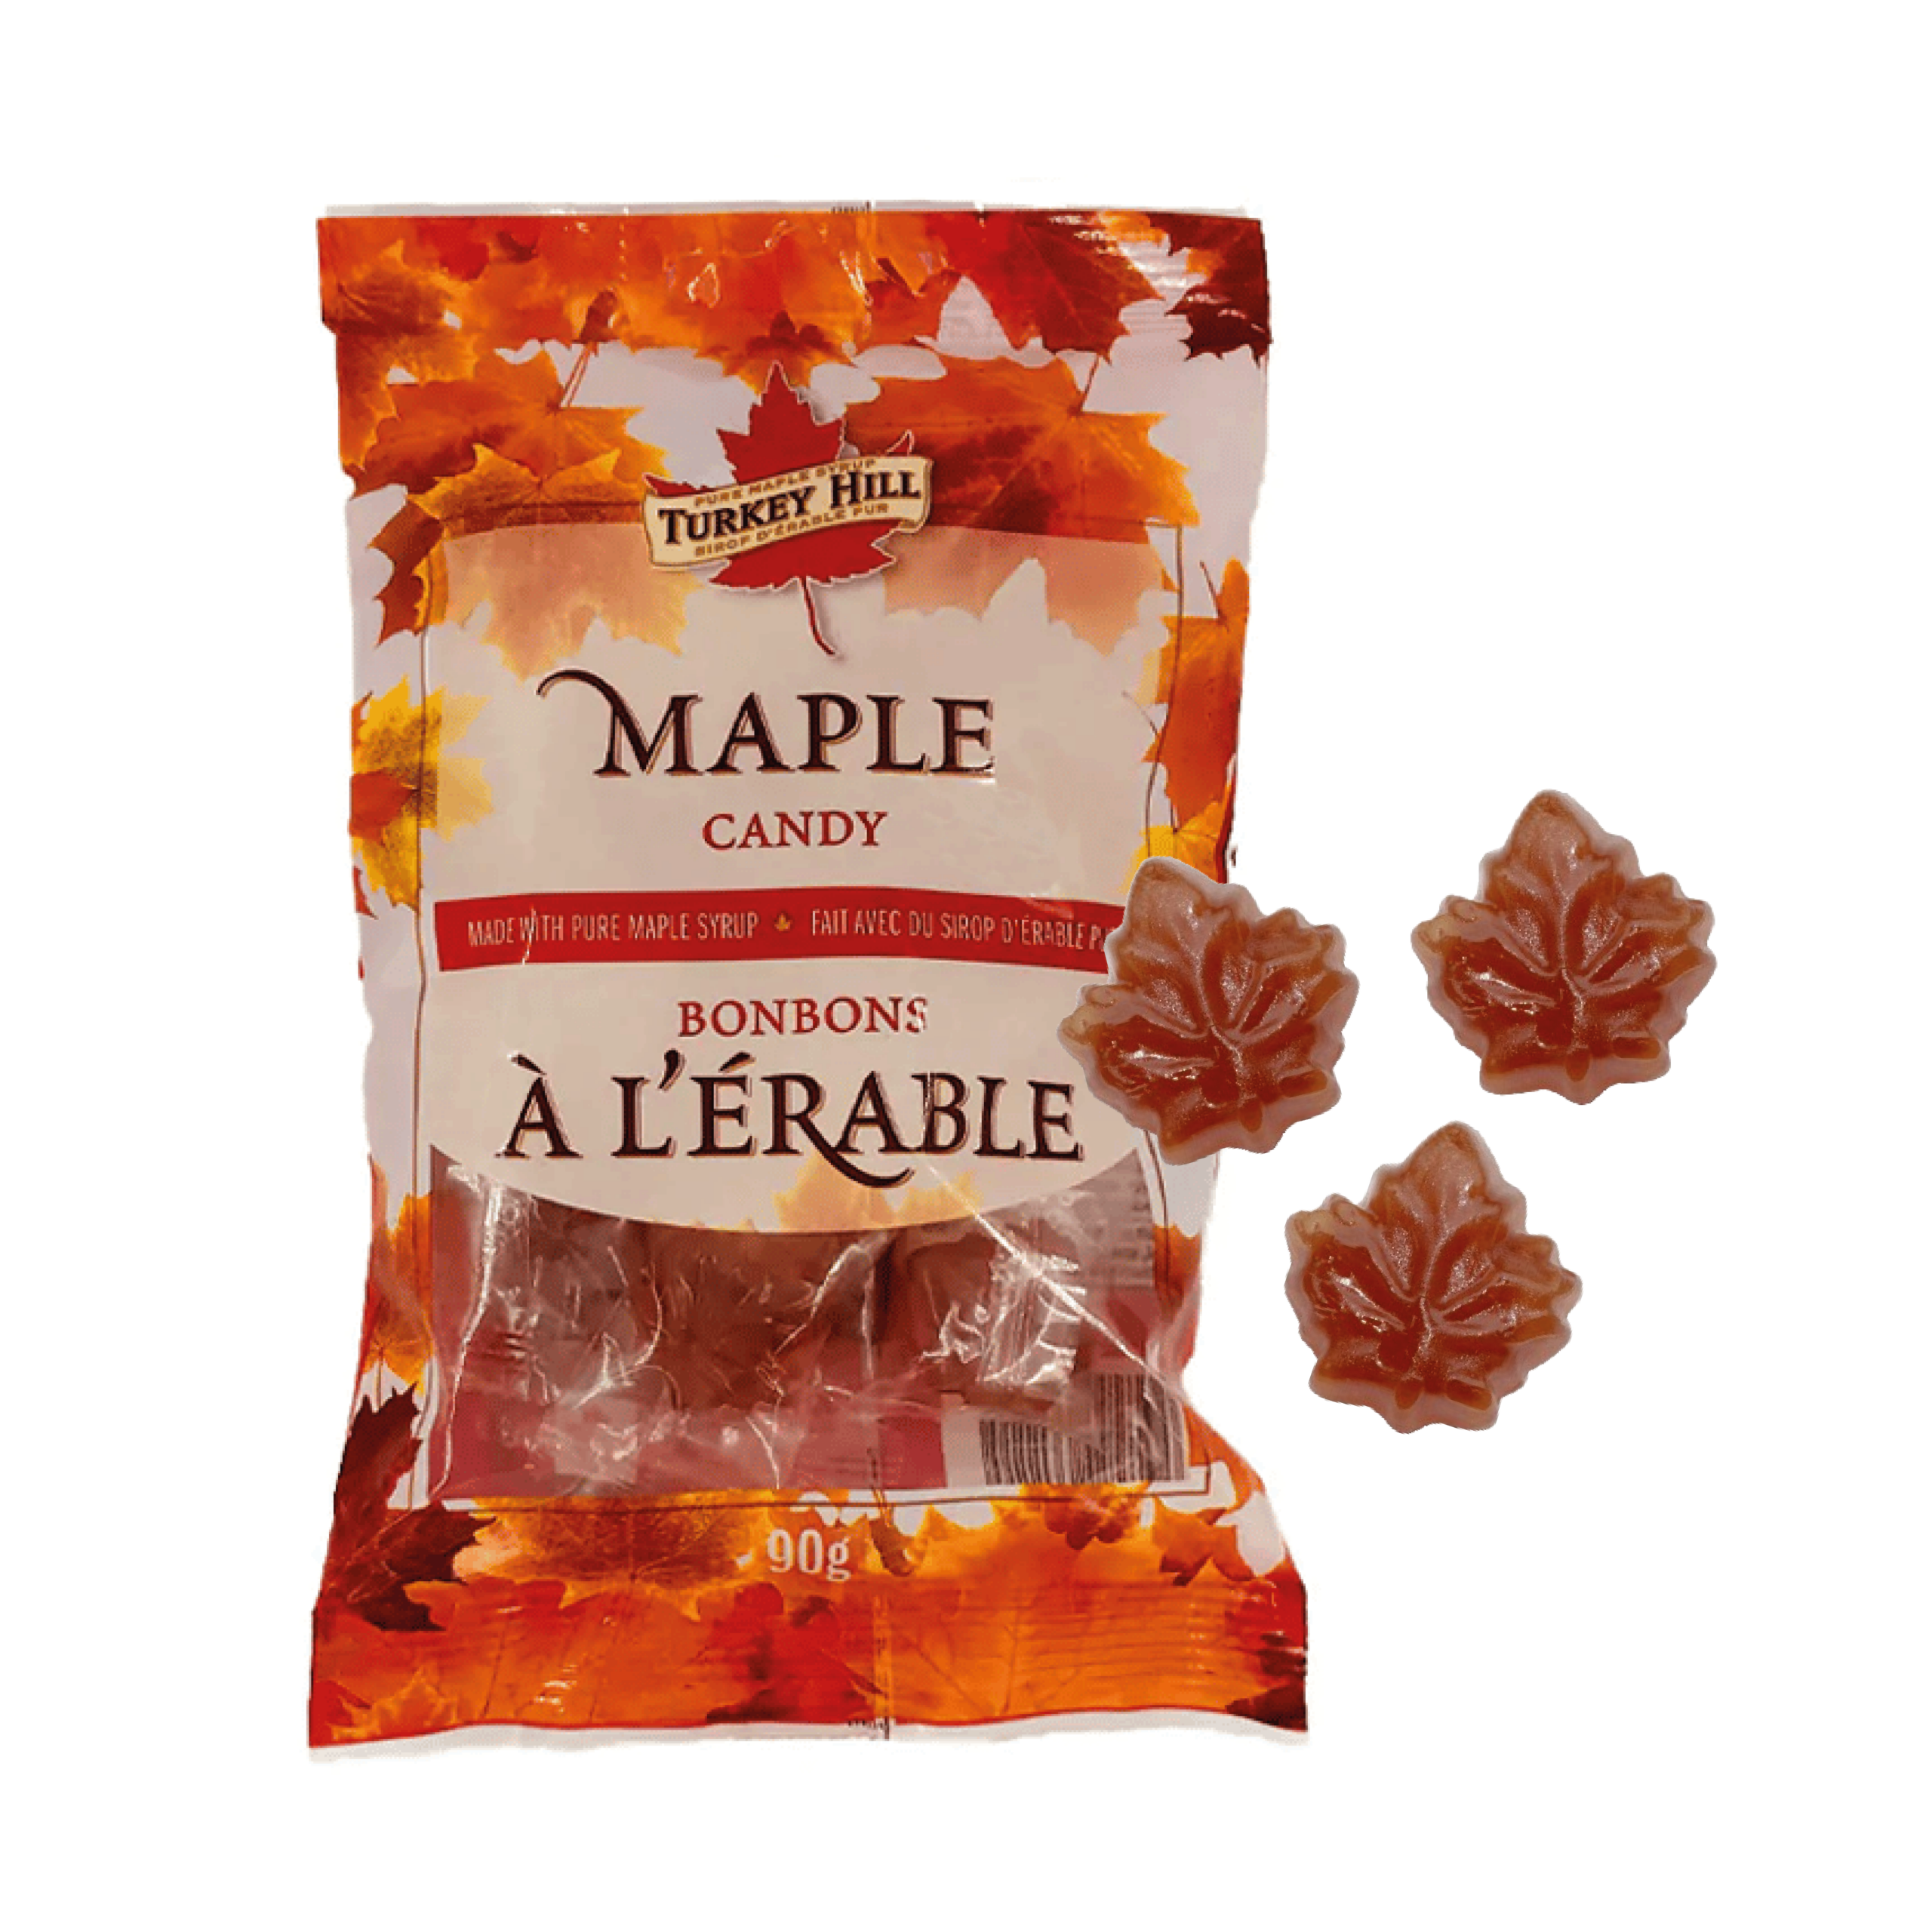 Featured image for “Maple Candy”